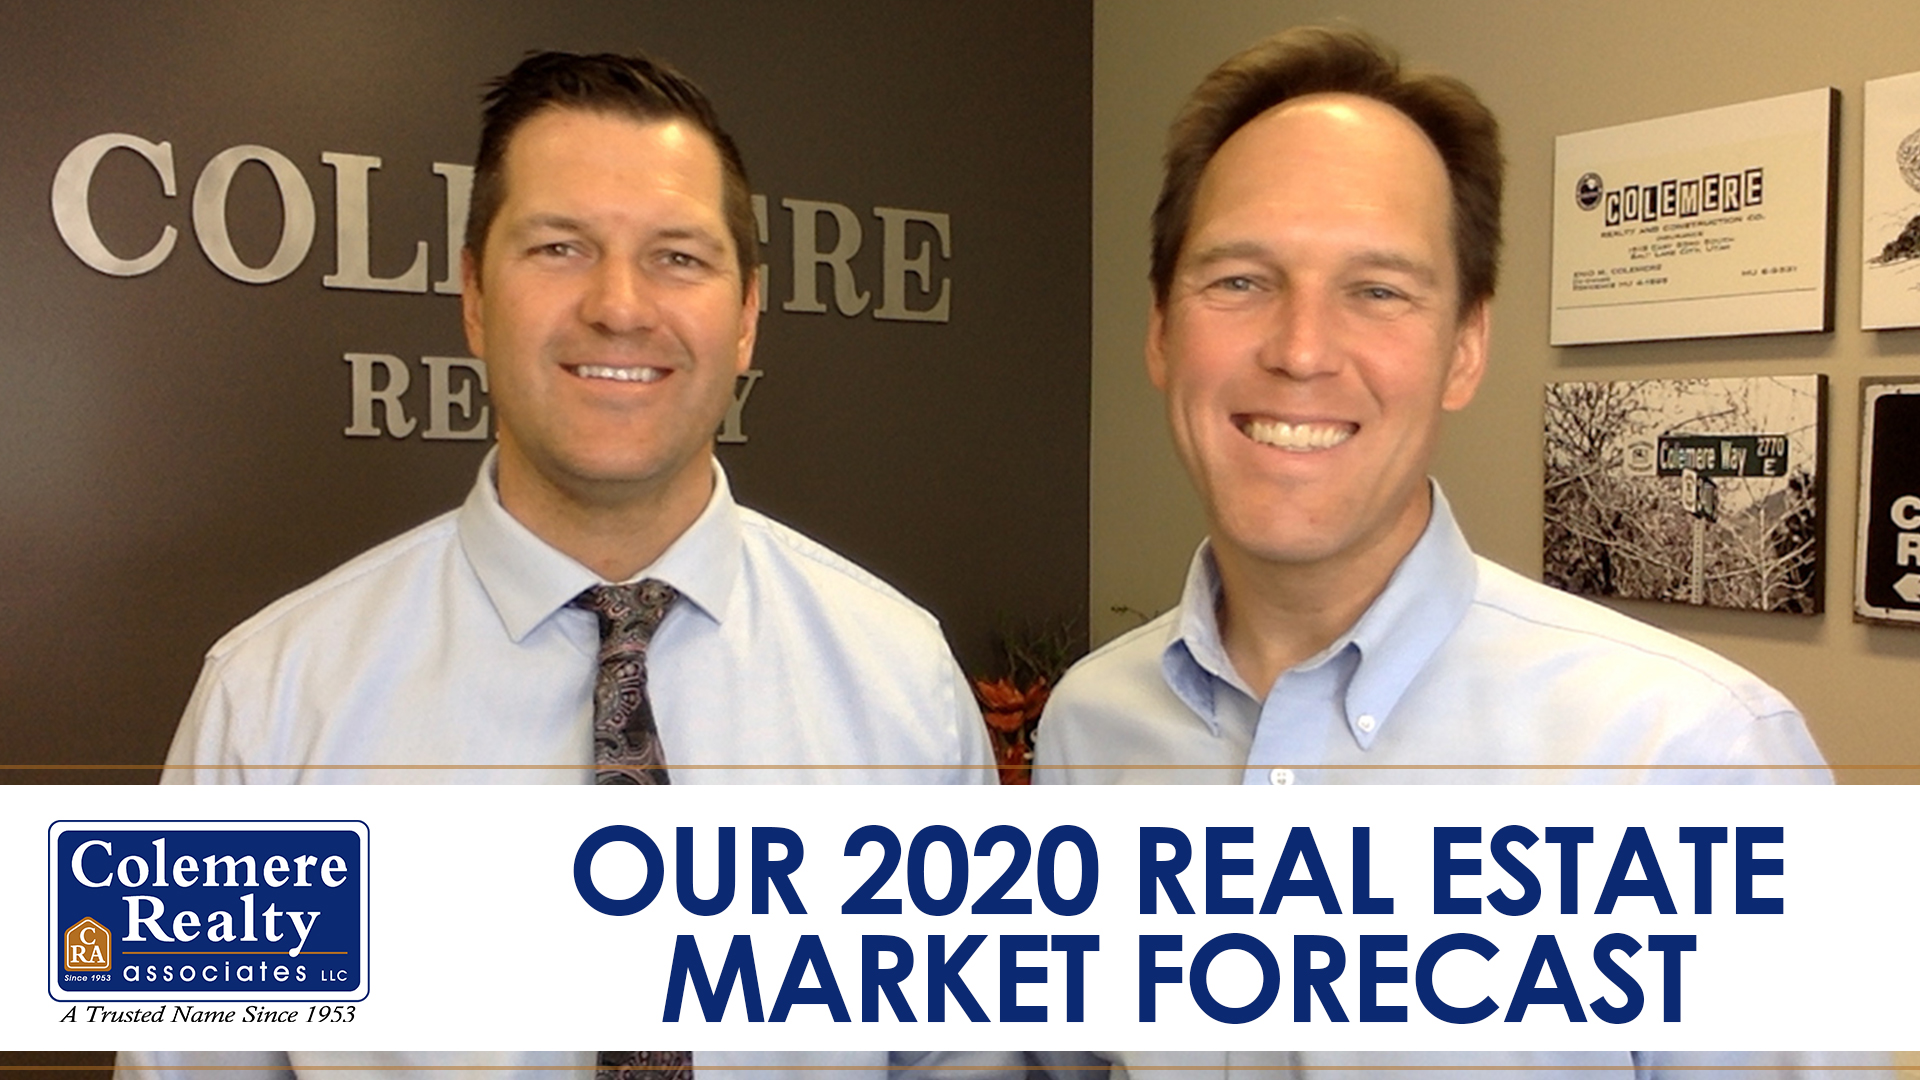 Our Market Forecast for Real Estate in 2020